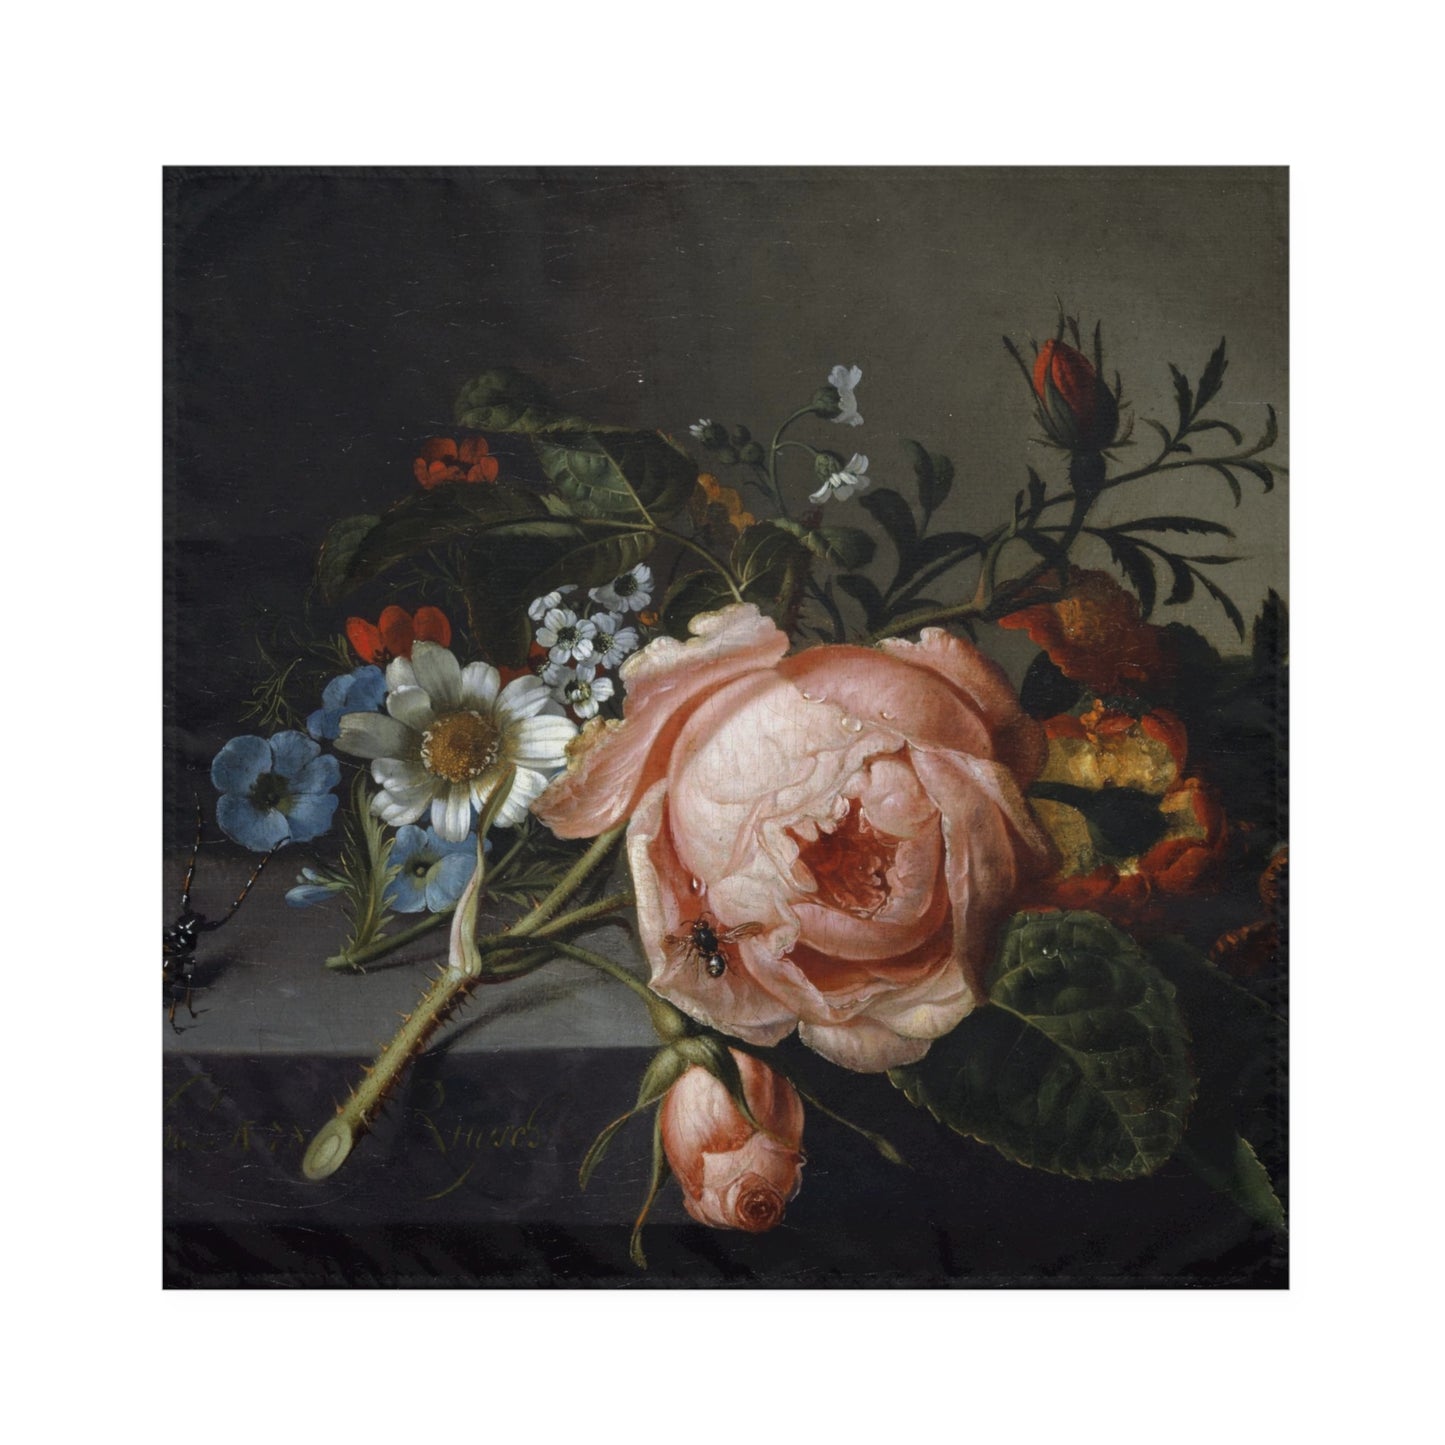 RACHEL RUYSCH - STILL LIFE WITH ROSE BRANCH, BEETLE AND BEE - ART NAPKINS SET